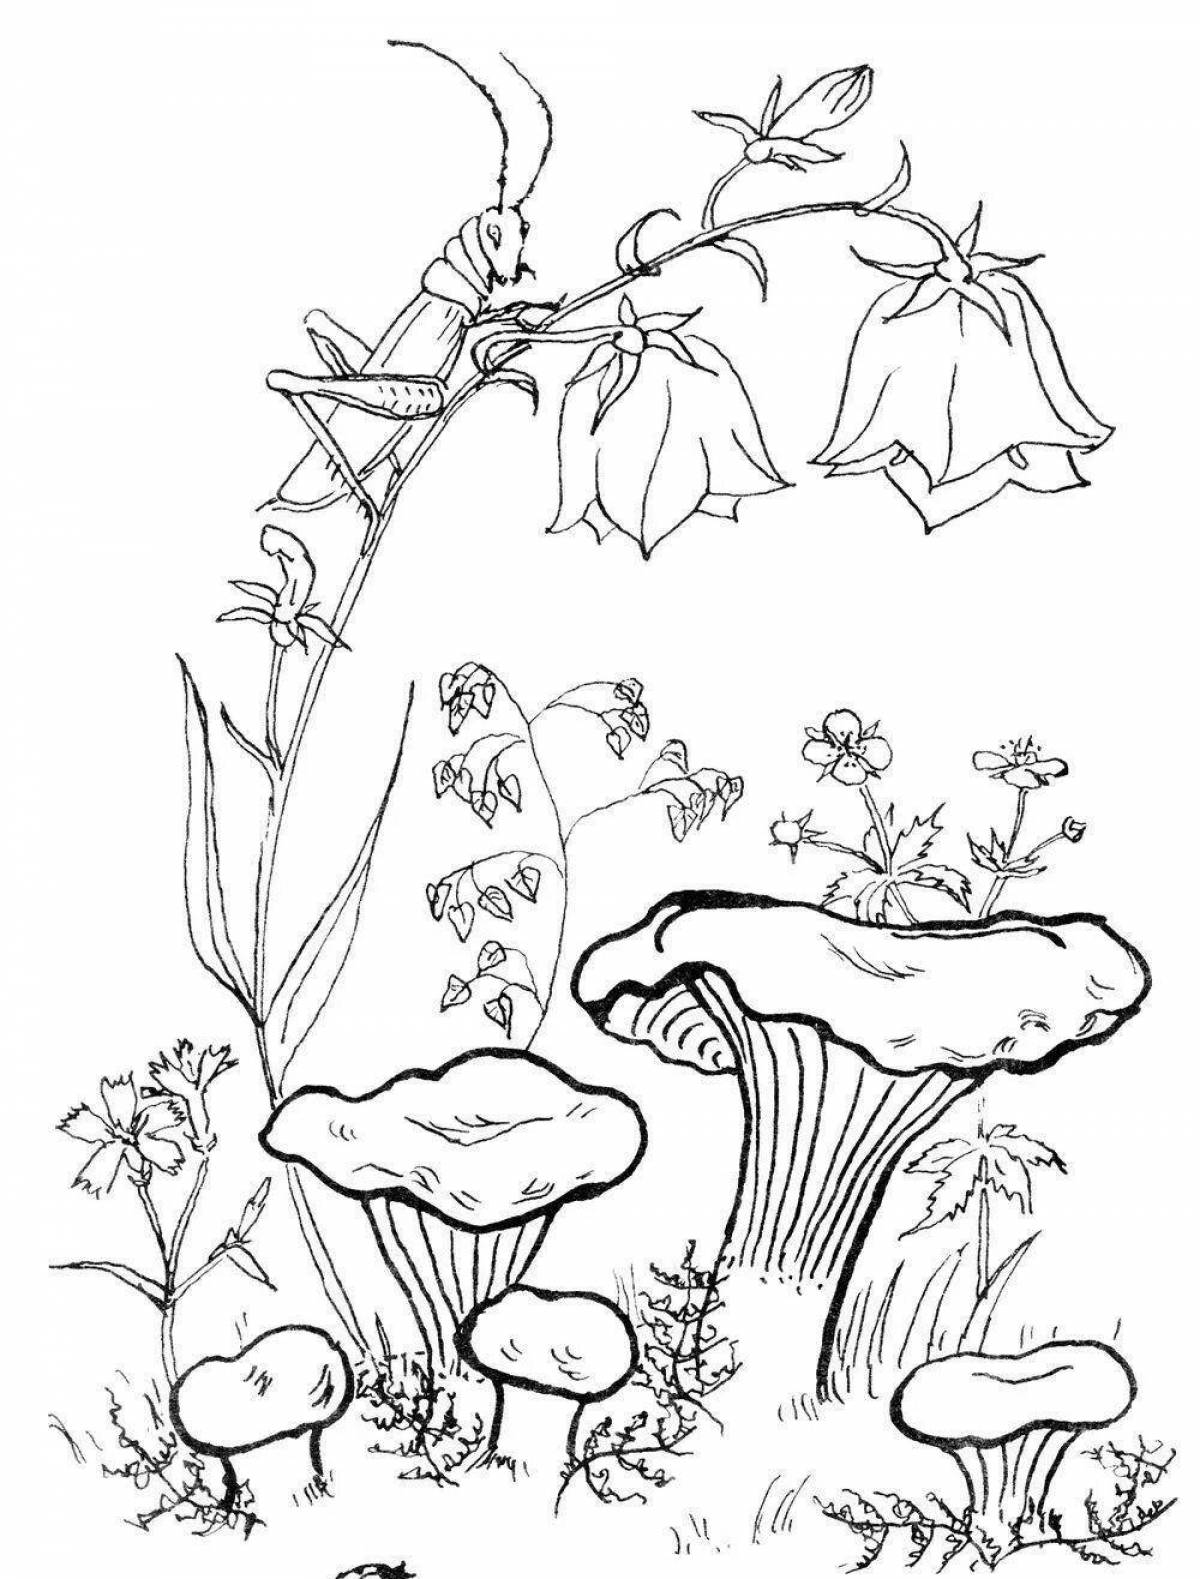 Coloring book bewitching mushroom chanterelle